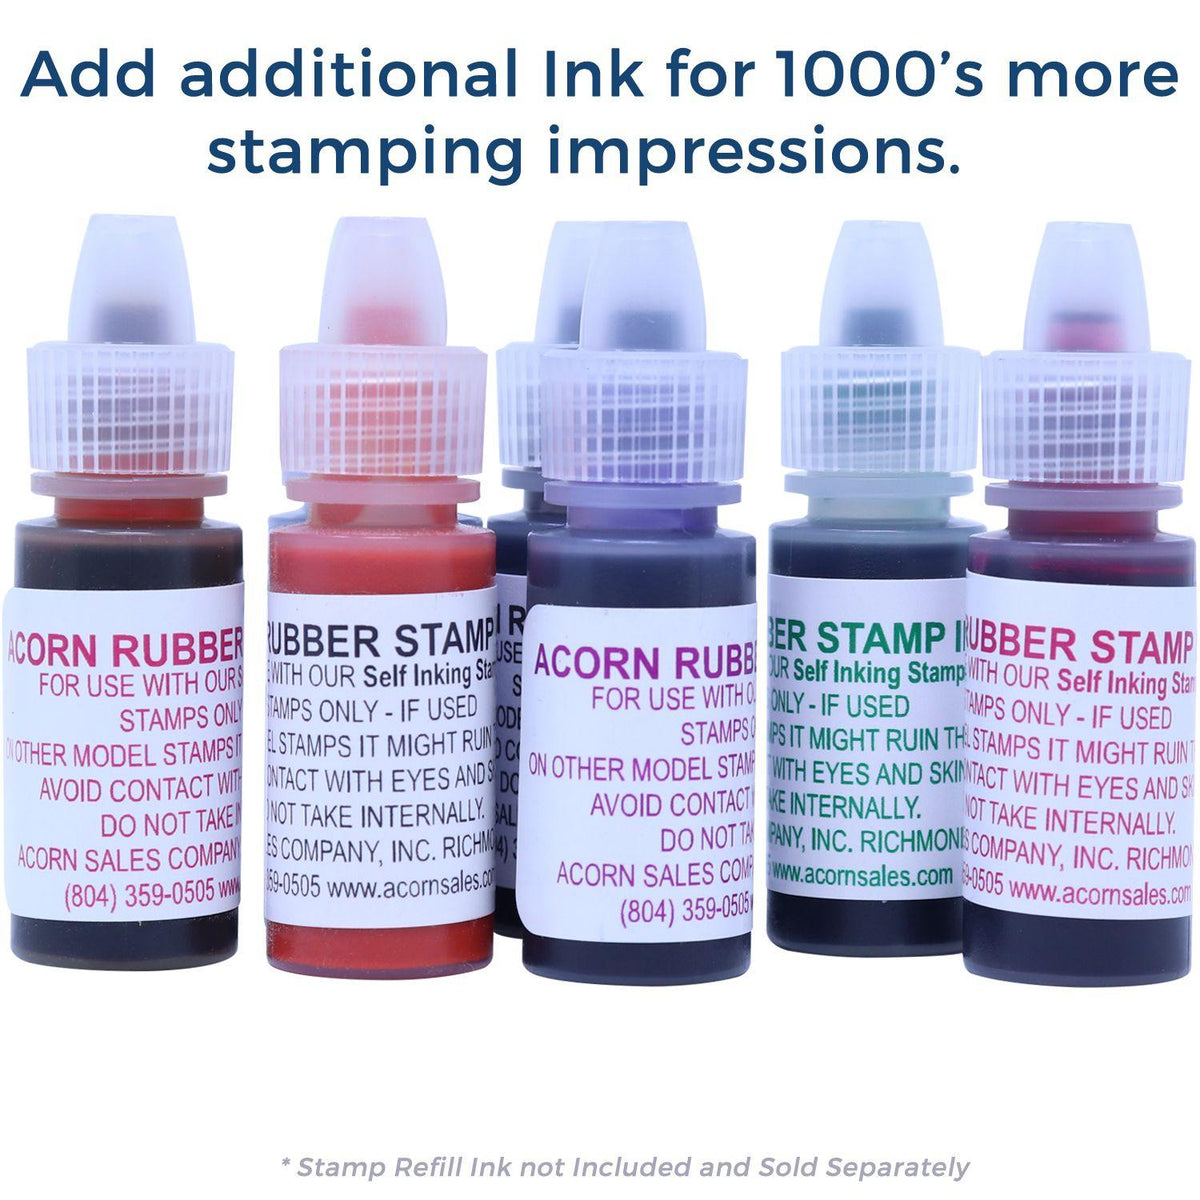 Refill Inks for Large Pre-Inked Narrow Confidential Stamp Available